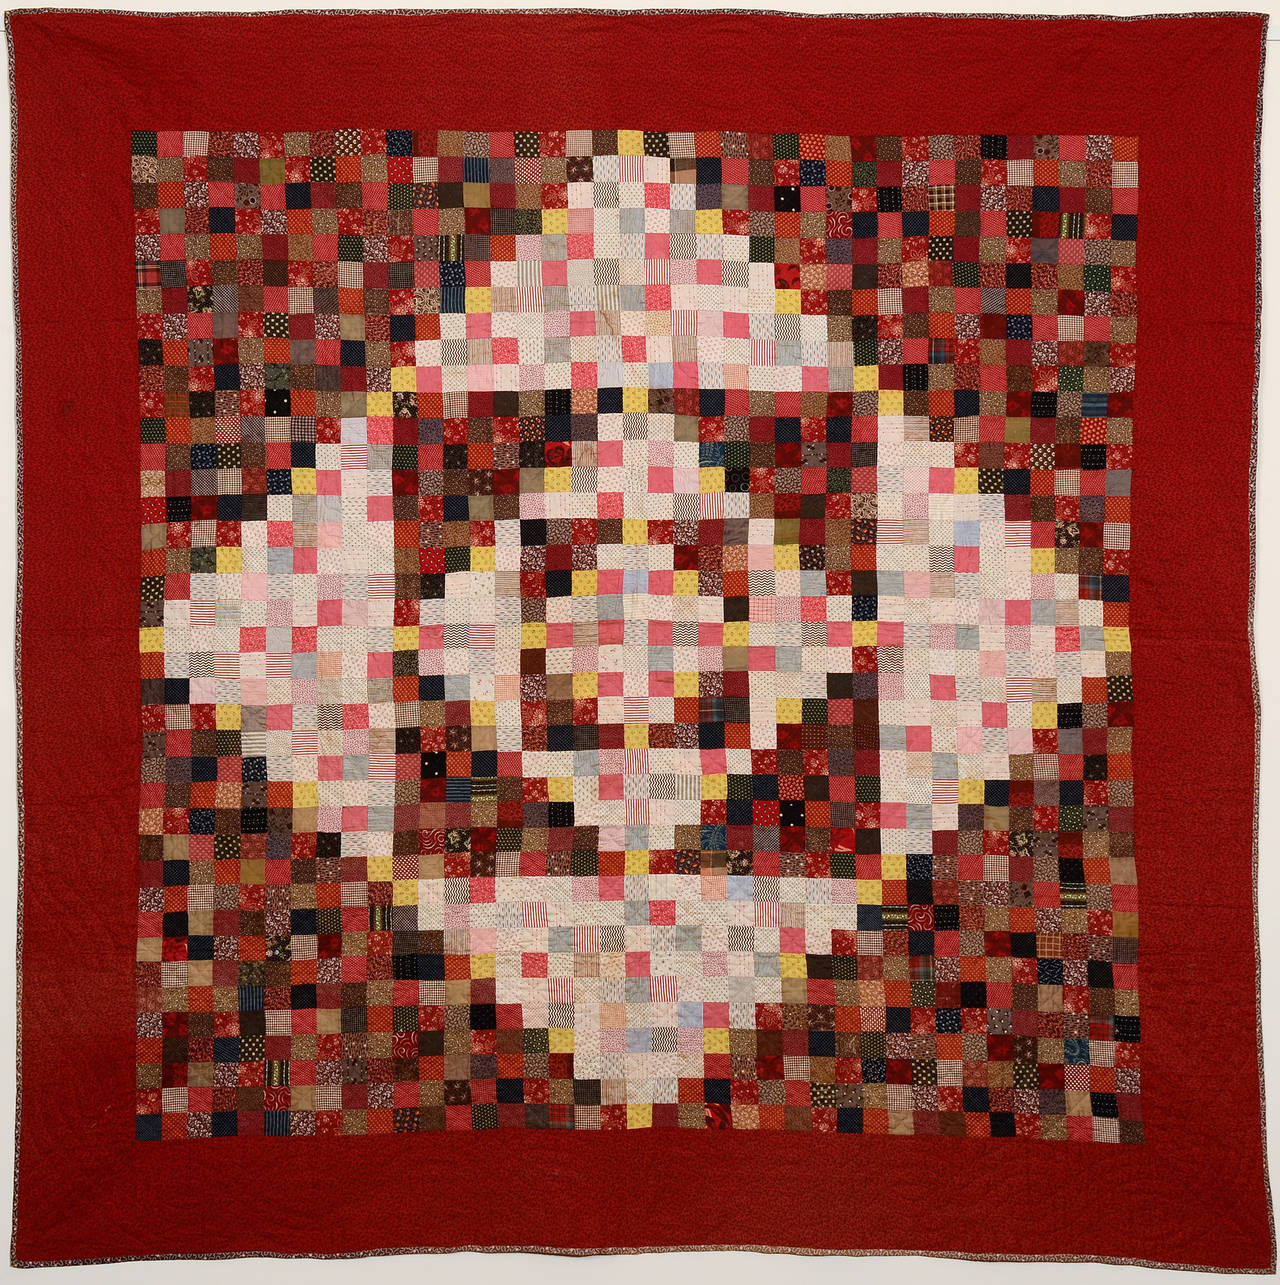 This diamond in a square quilt is created with the use of one patch blocks. It is an unusual variation from Bowmansville, a small town in Lancaster, Pennsylvania known for its Star pattern quilts made in this manner. The light and dark calico